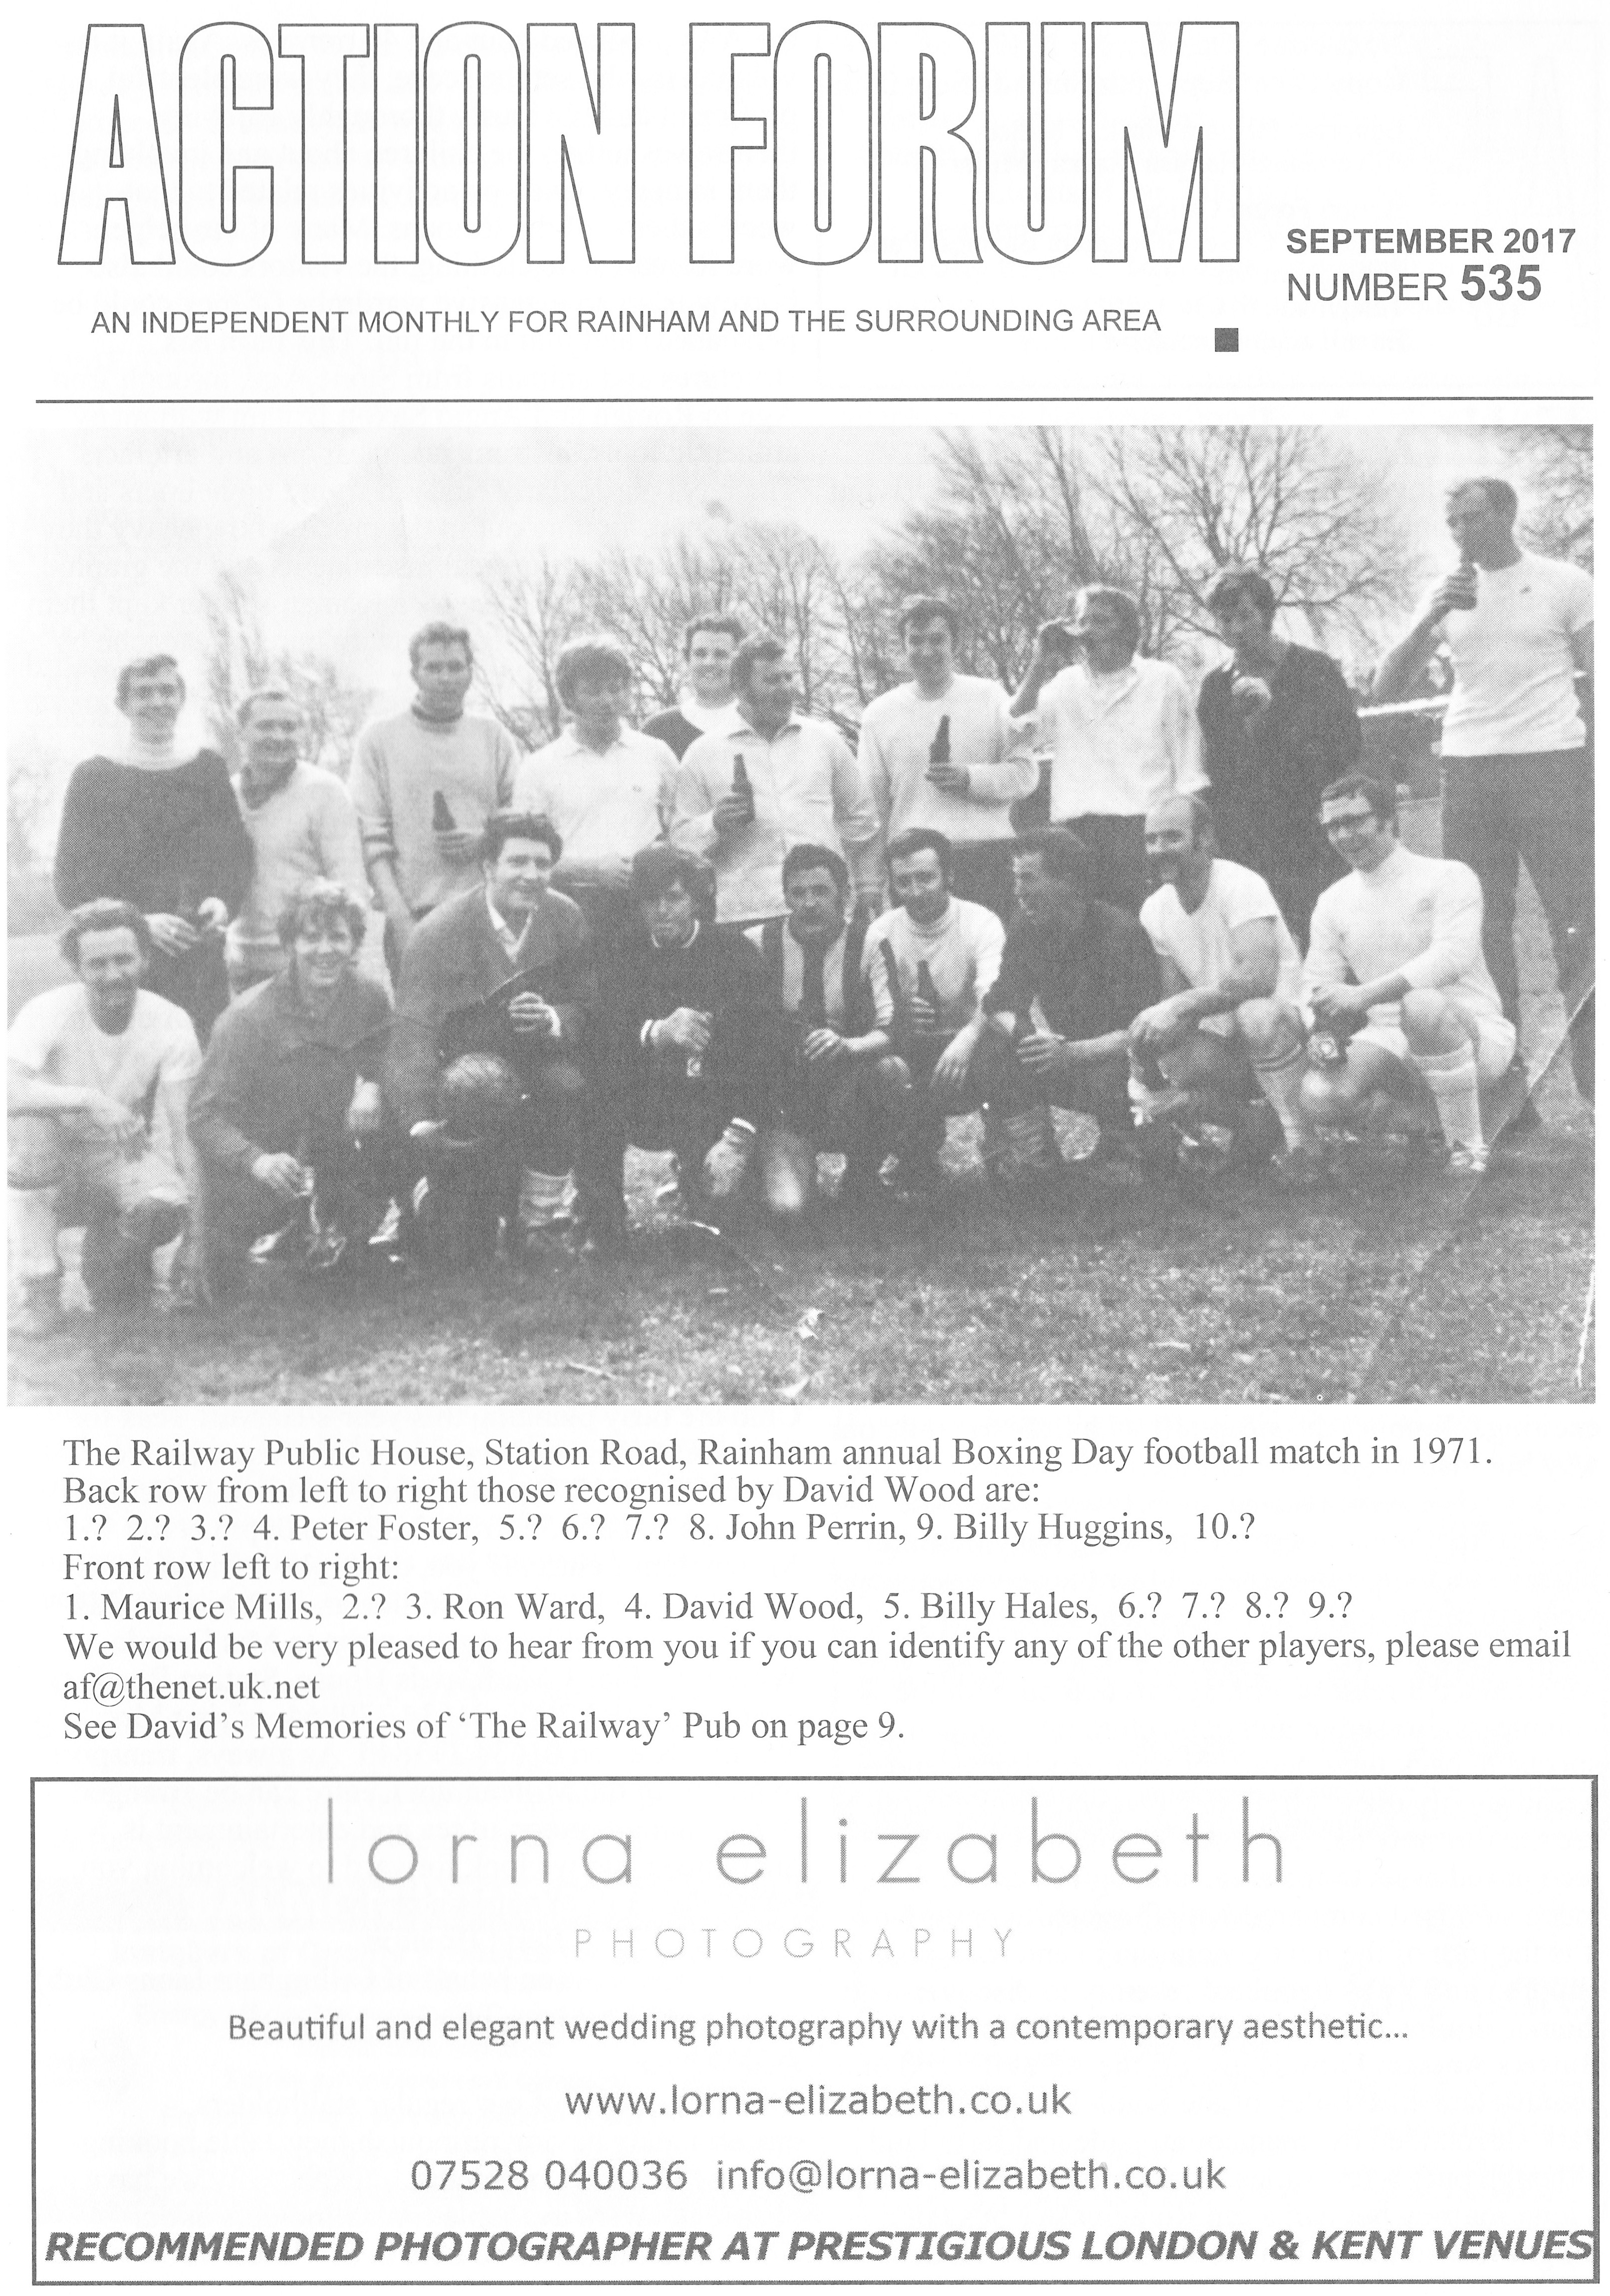 Cover photo of Railway Pub Football team in 1971